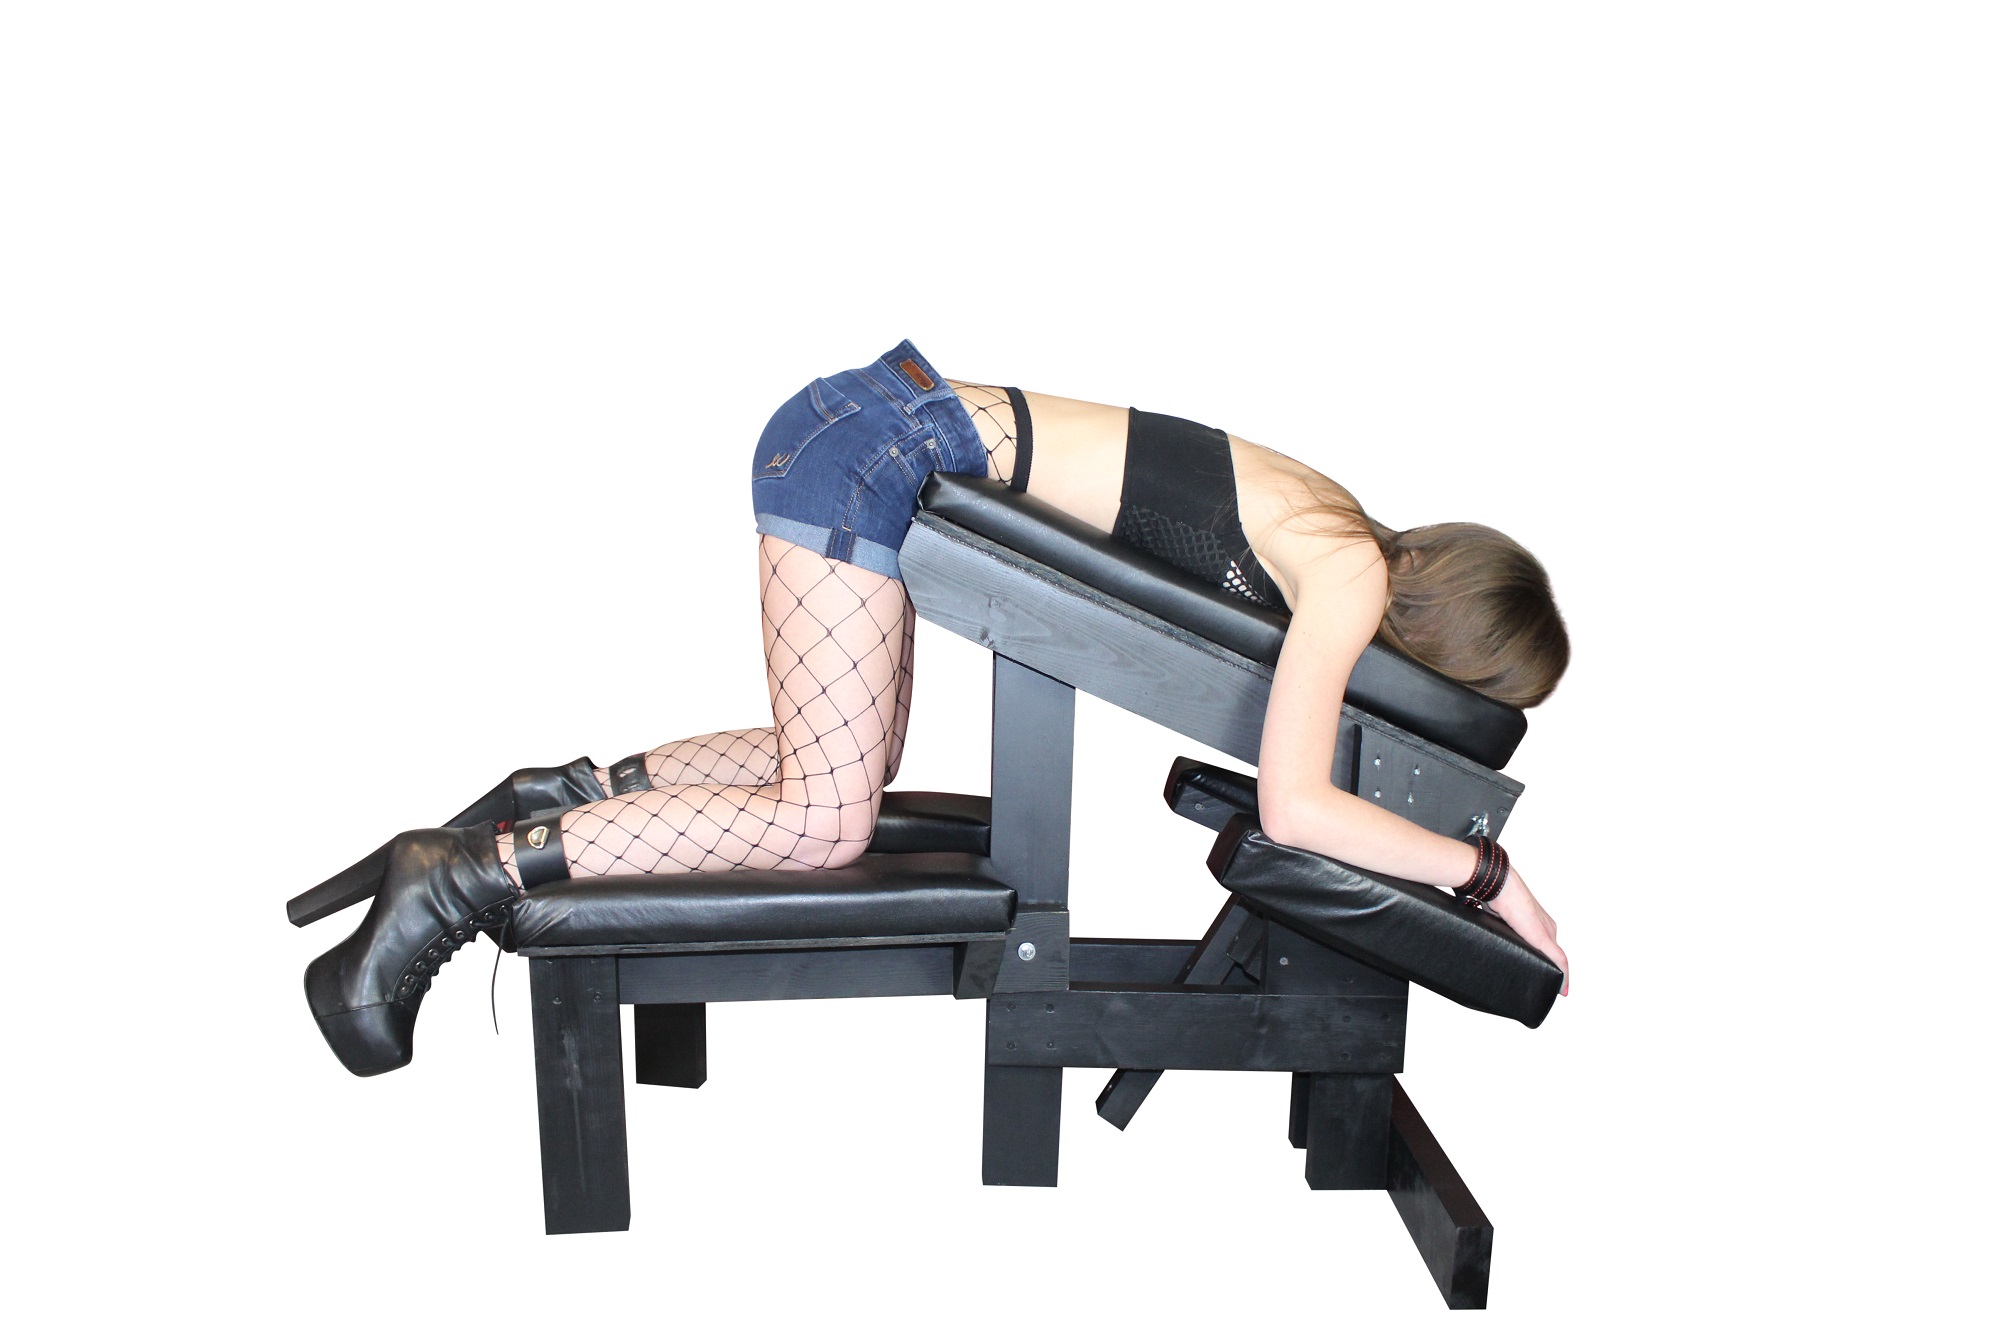 Adjustable angle bench with face cradle